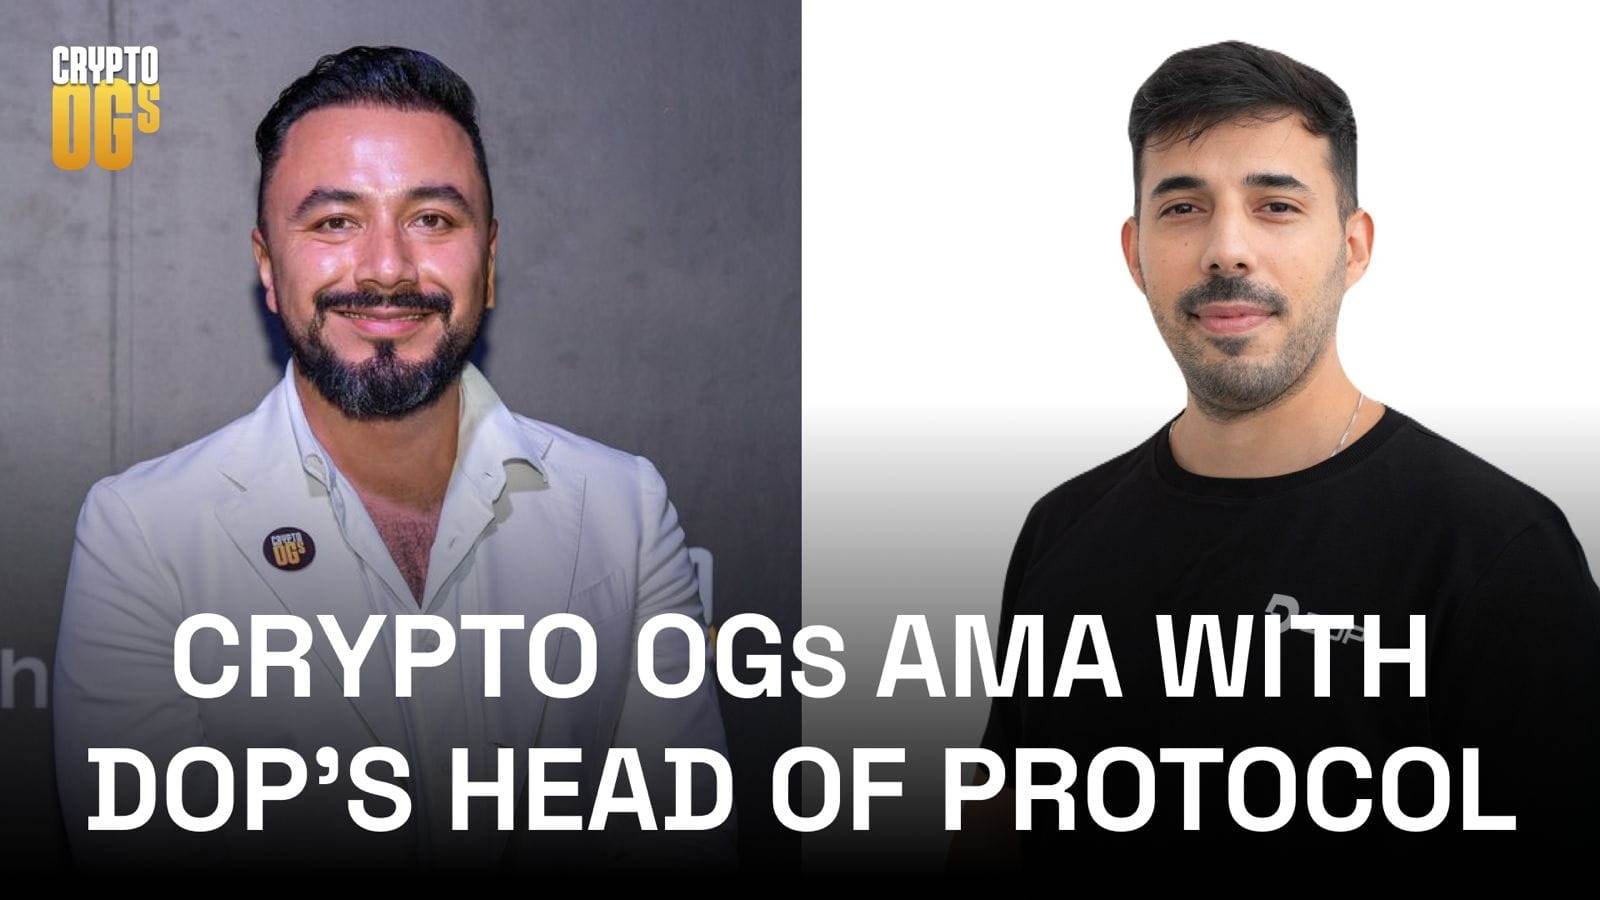 Crypto OGs AMA with DOP's Head of Protocol